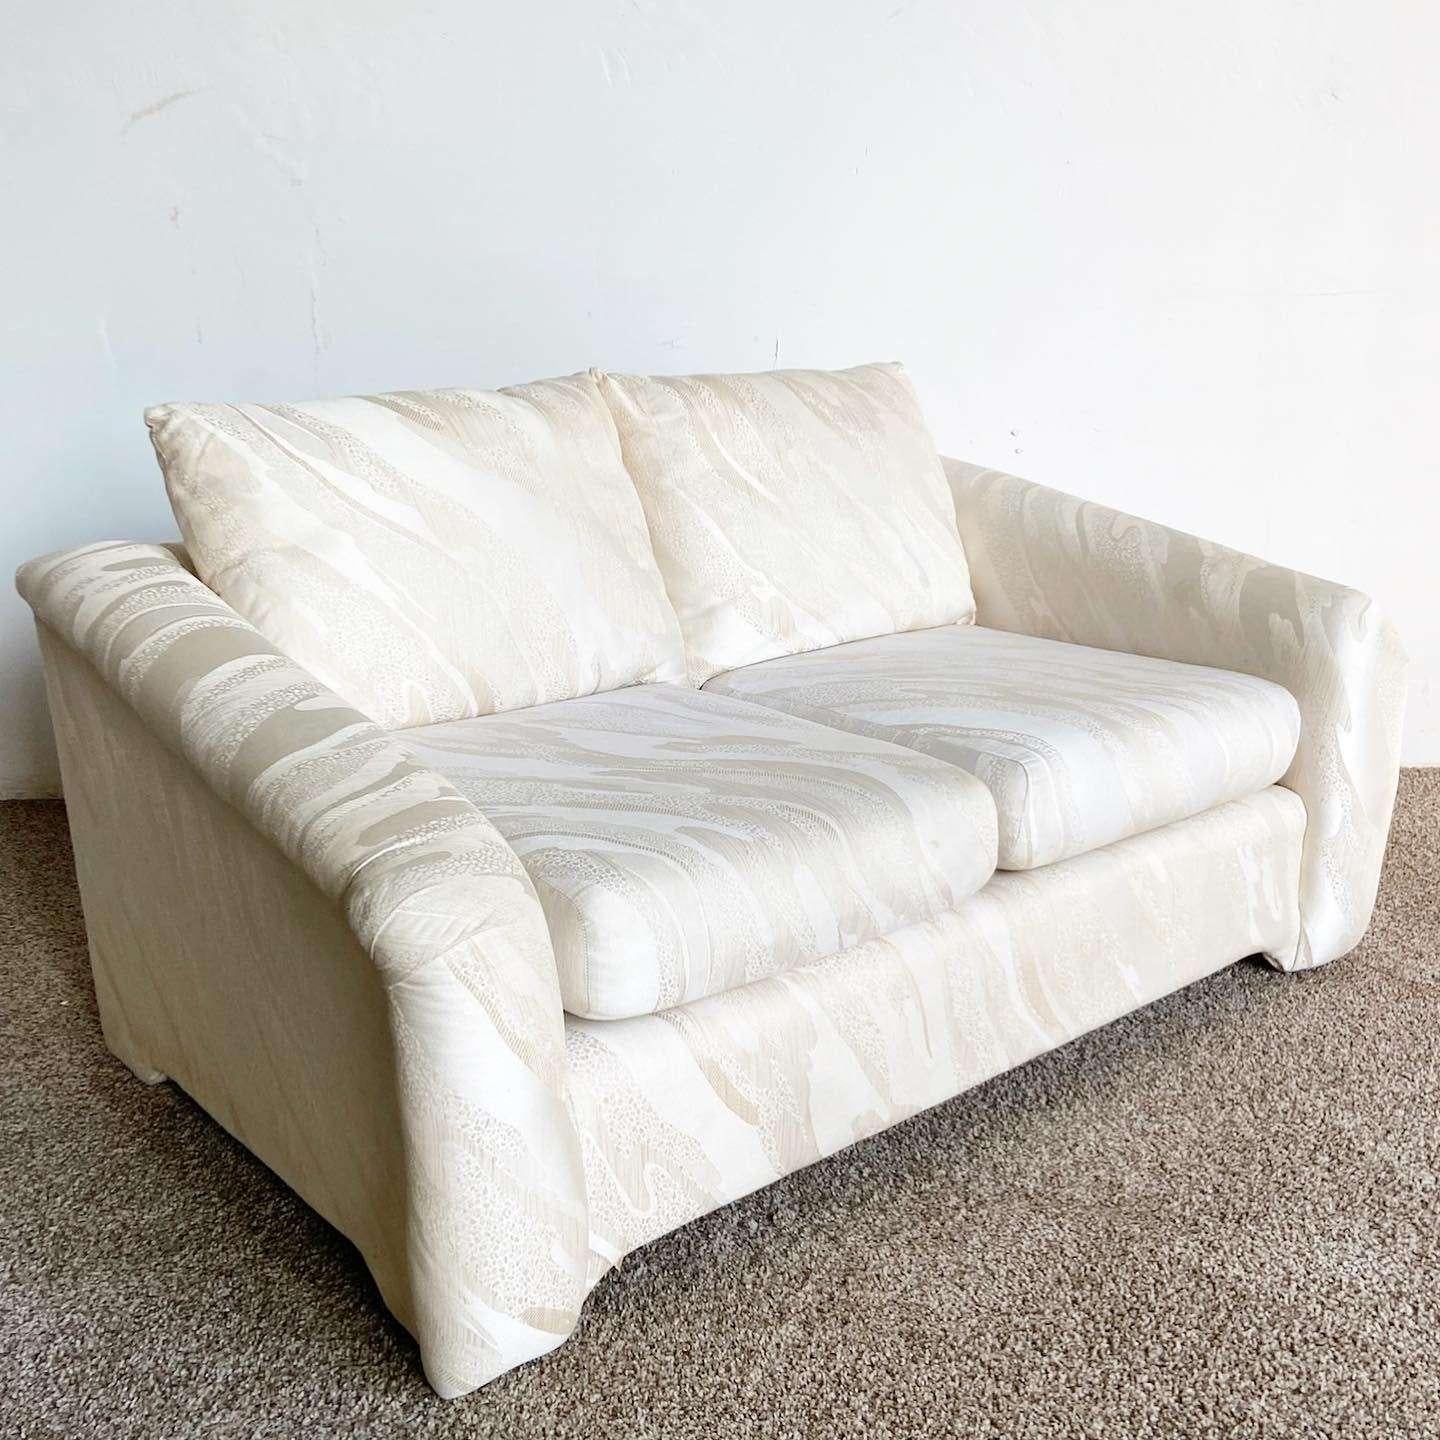 Exceptional vintage postmodern sculpted love seat. Features a beige textured fabric throughout.
